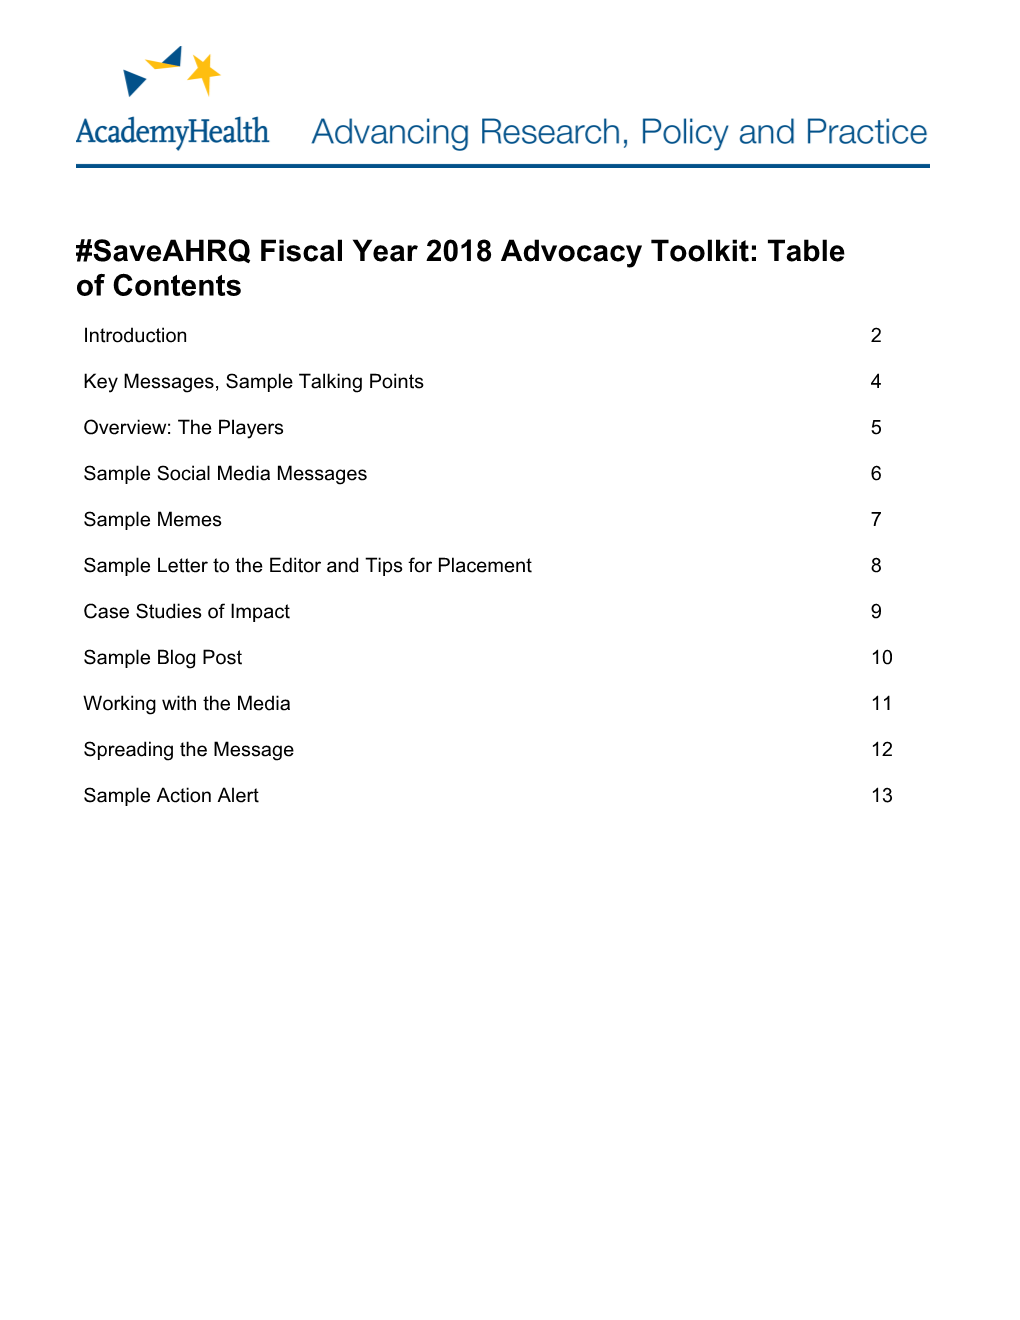 Saveahrq Fiscal Year 2018Advocacy Toolkit: Table of Contents